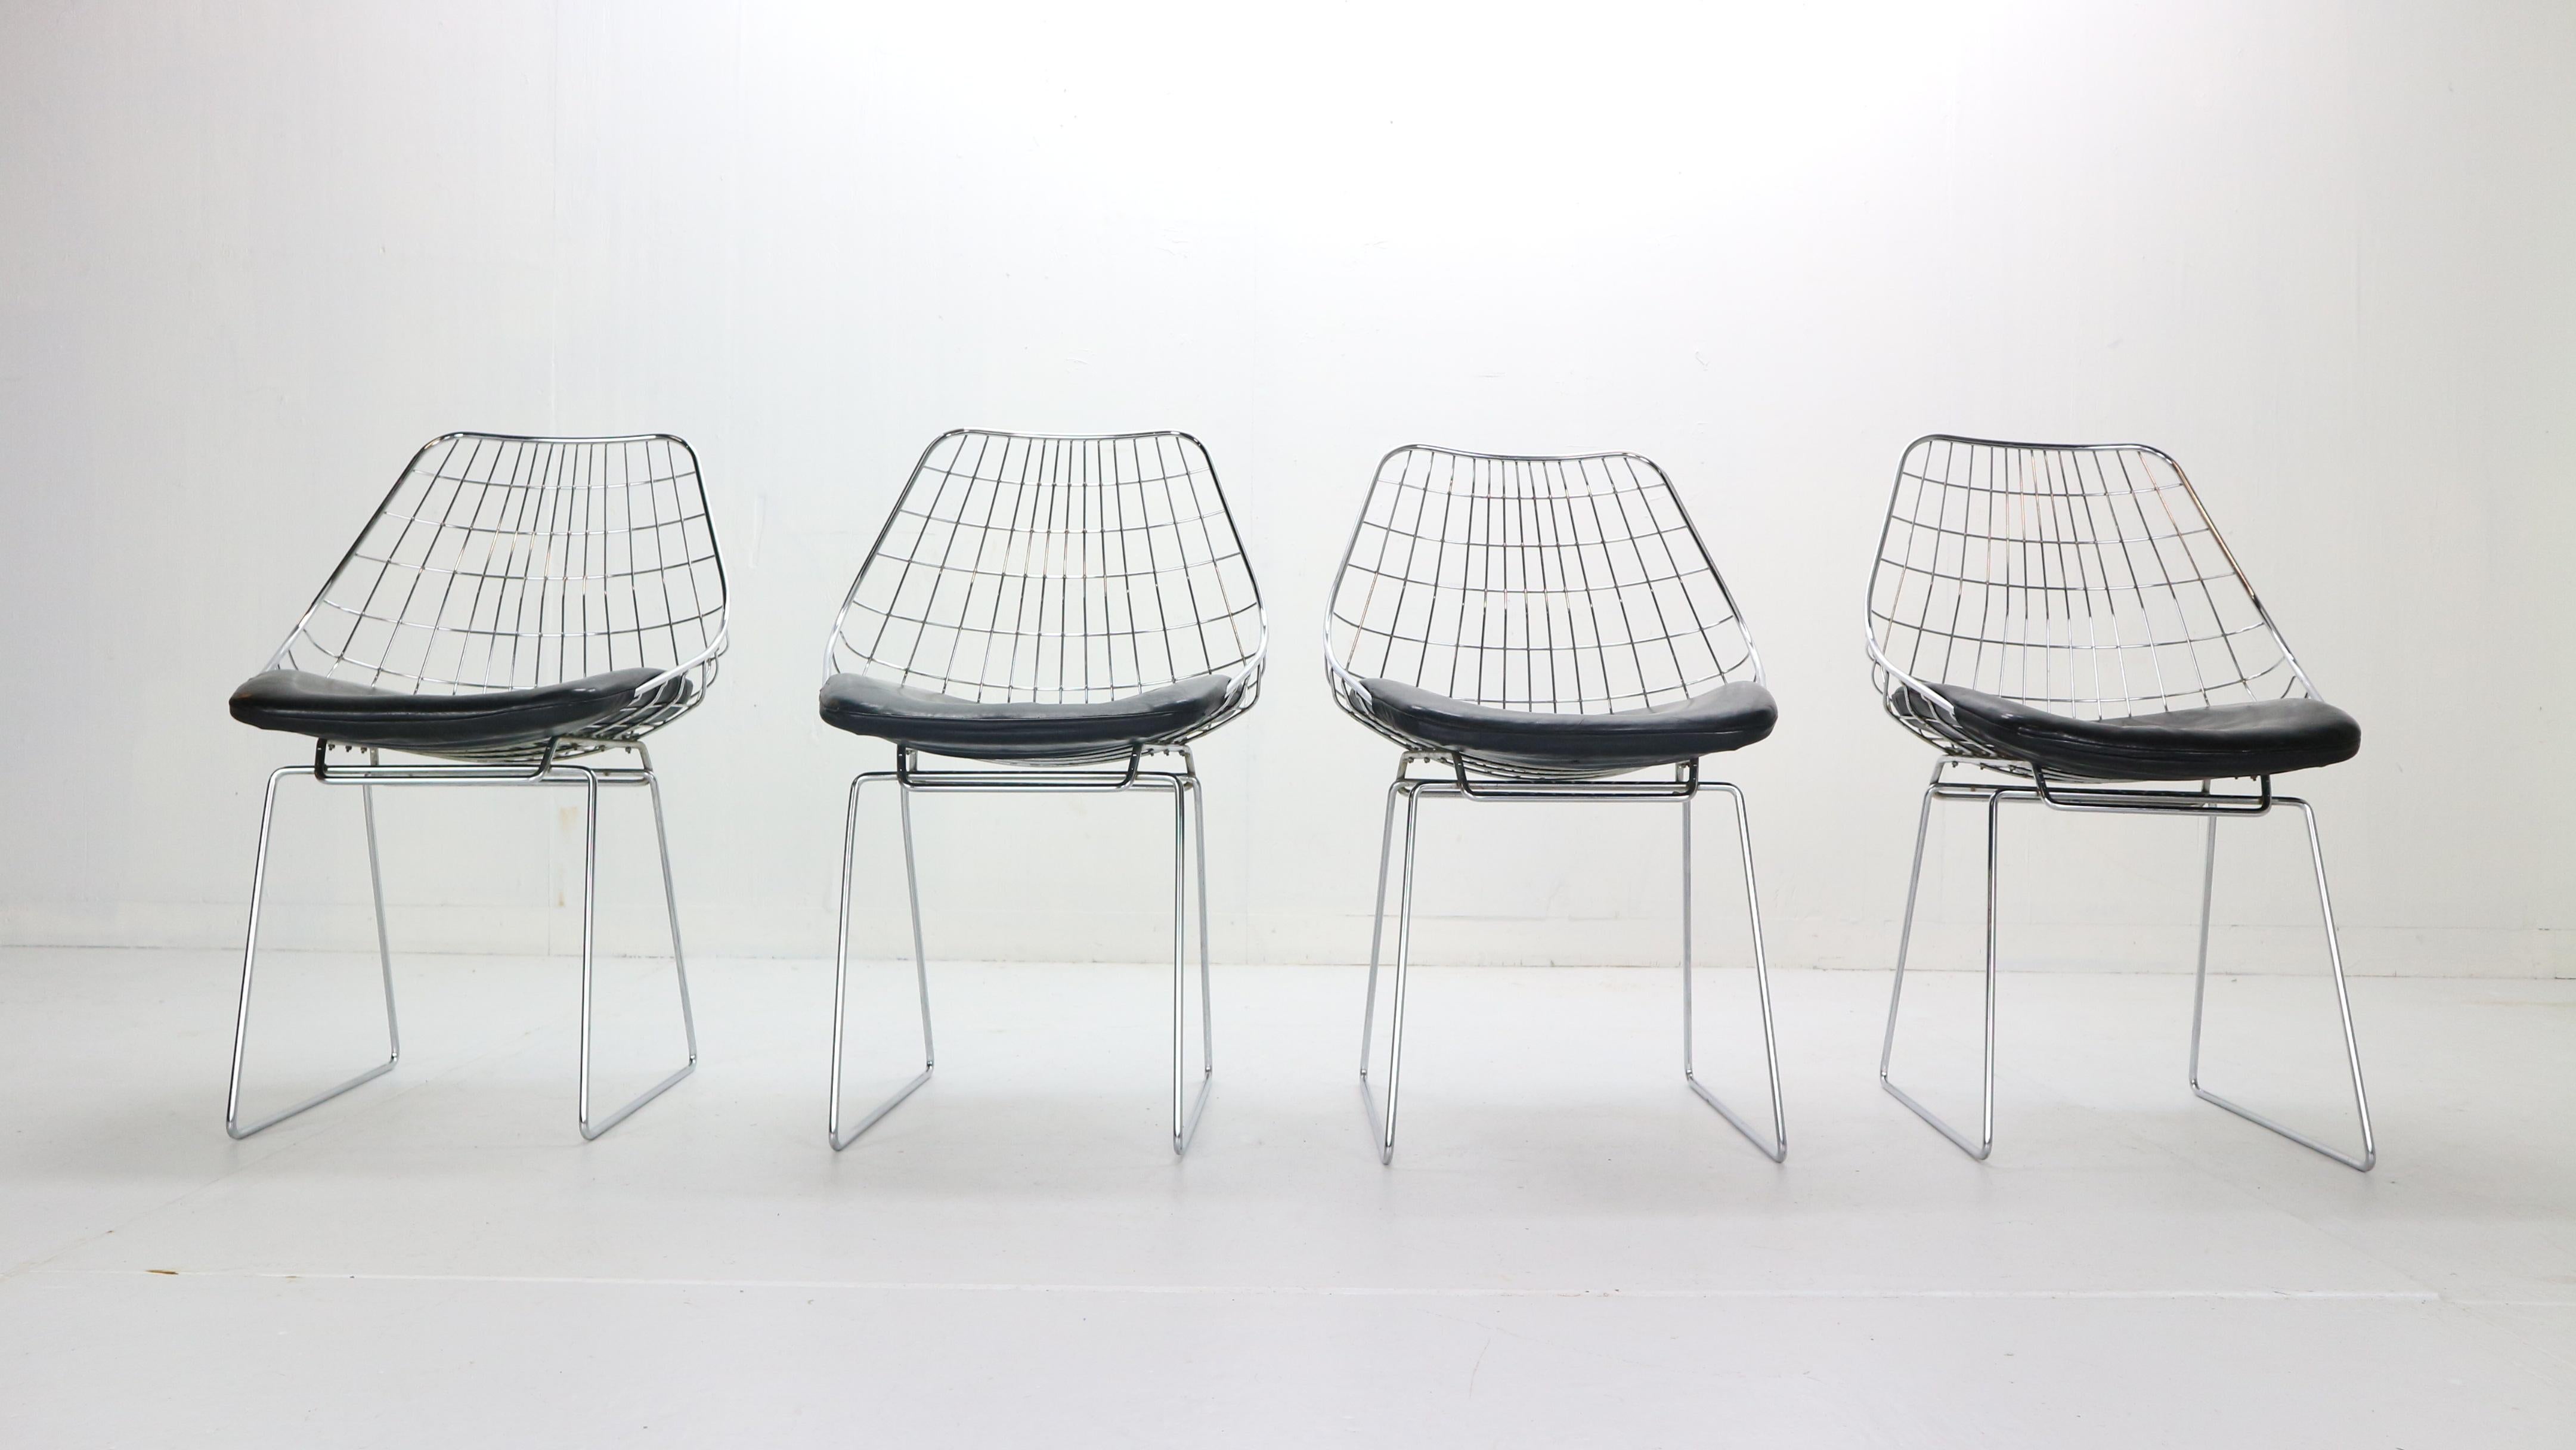 Mid-Century Modern period set of 4 wire chairs designed by Cees Braakman for Pastoe, 1950s, Netherlands.
Model No.- SM05. Chrome wire chair with black leather cushions. 
At the time of its introduction in the mid-1950s one of the few European